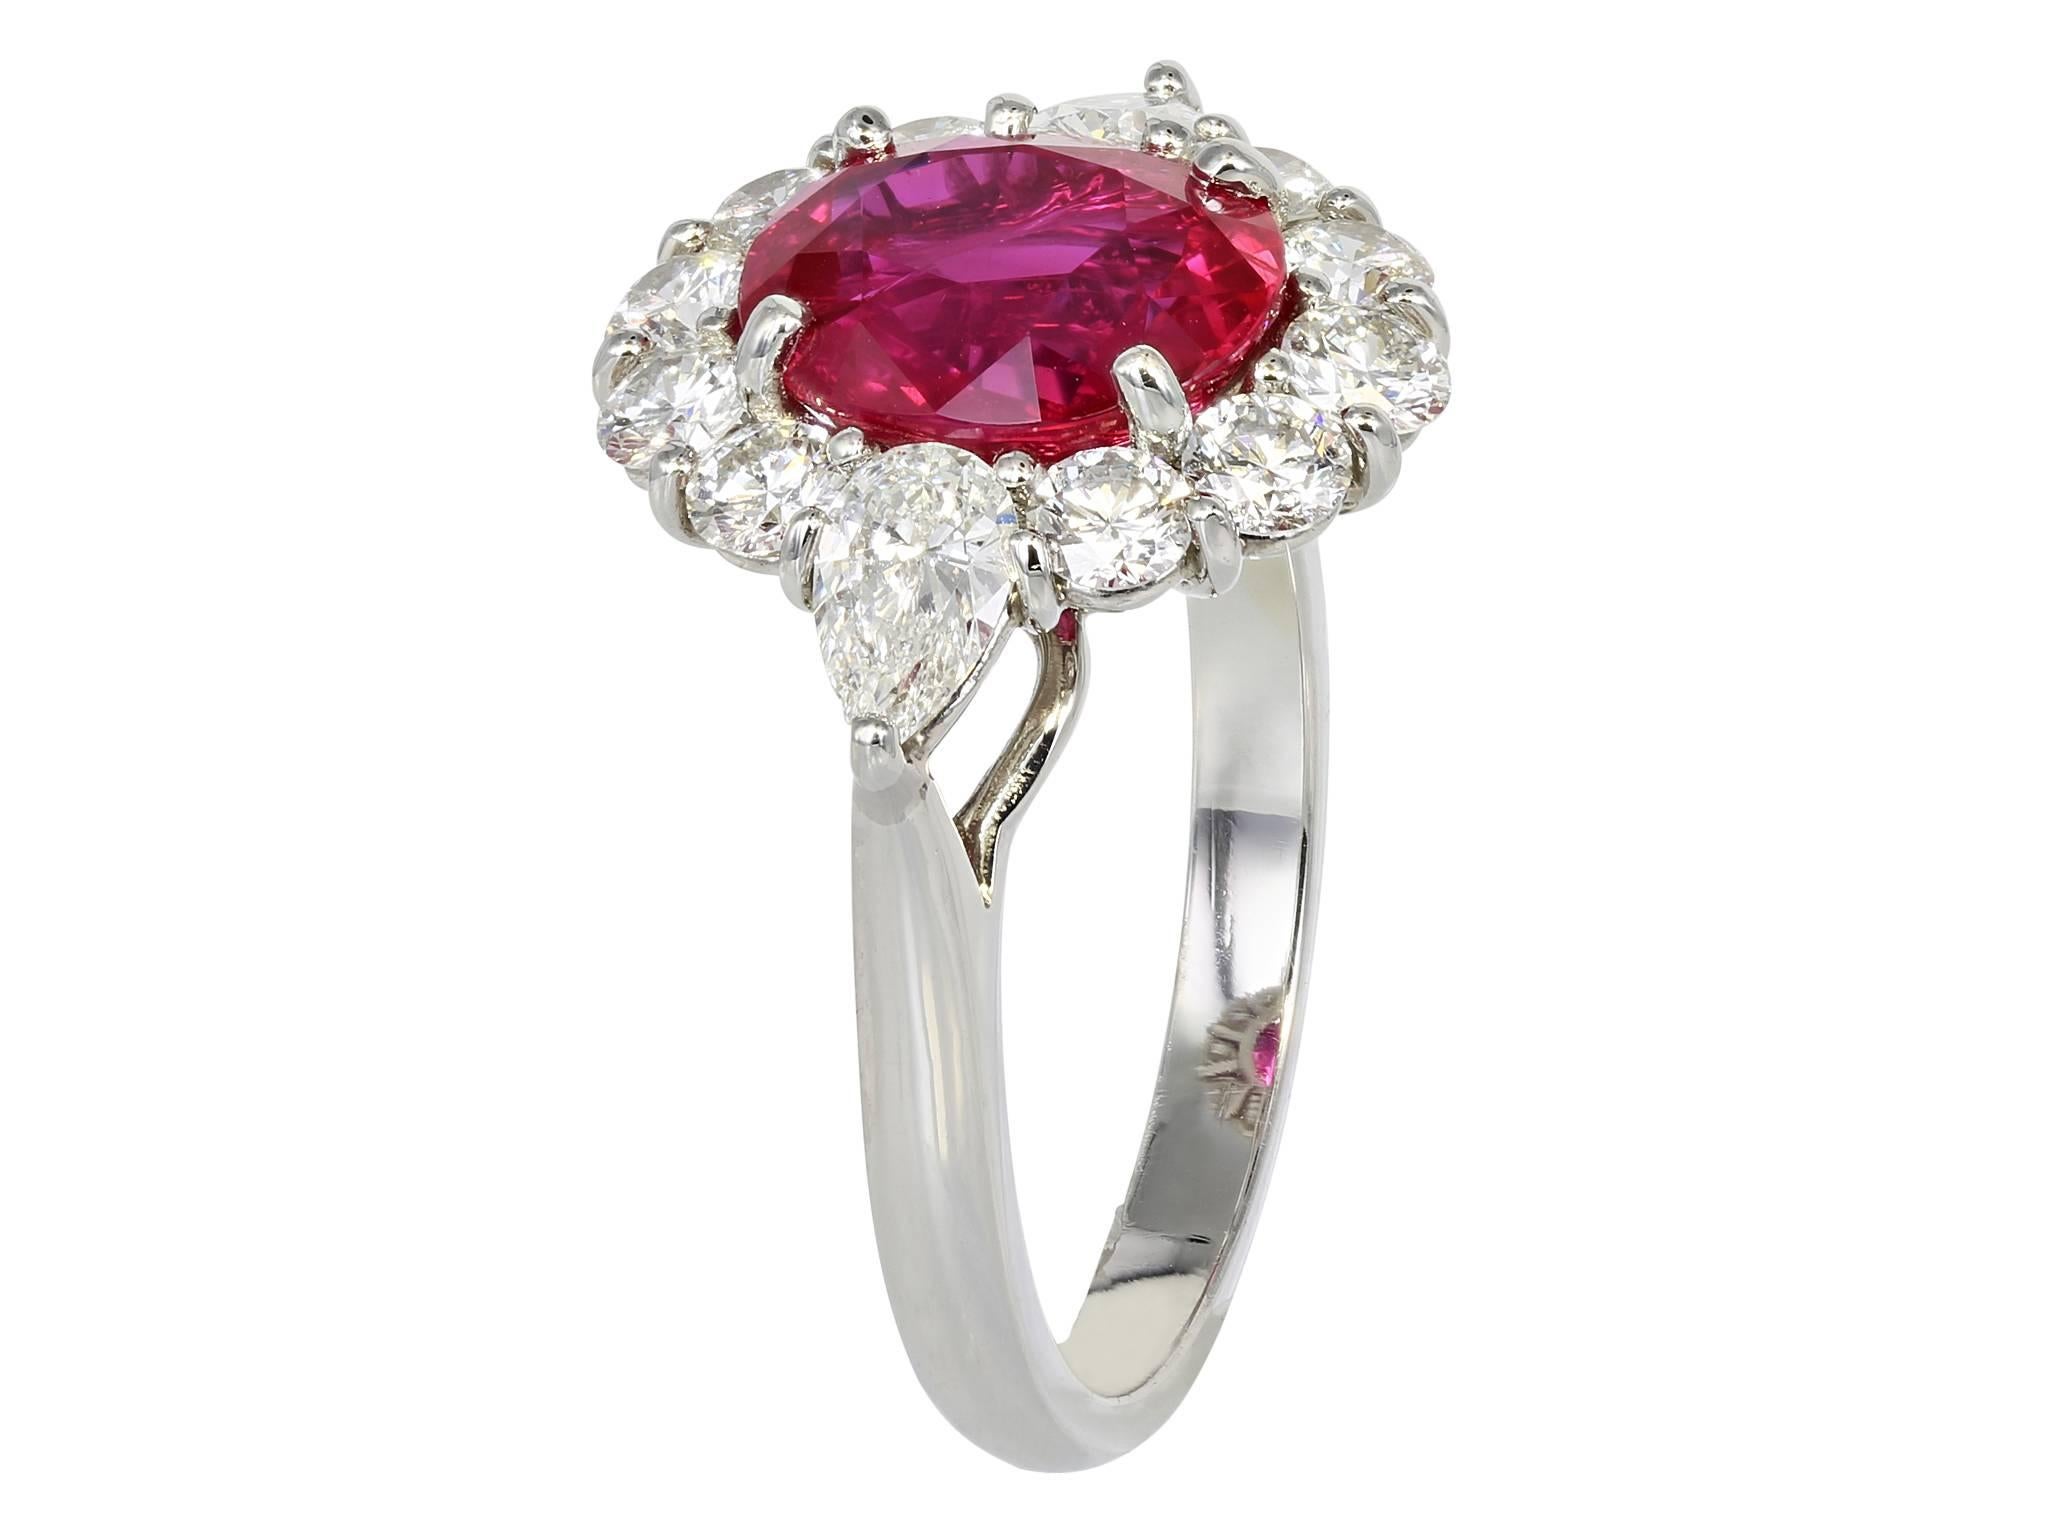 Platinum custom cluster ring consisting of one cushion cut Ruby weighing 3.16 carats, measuring 9.28 x 7.76 x 4.76mm, surrounded by 2 pear shape and 10 round brilliant diamonds with a total weight of 1.28 carats. This Ruby is GIA certified, cert